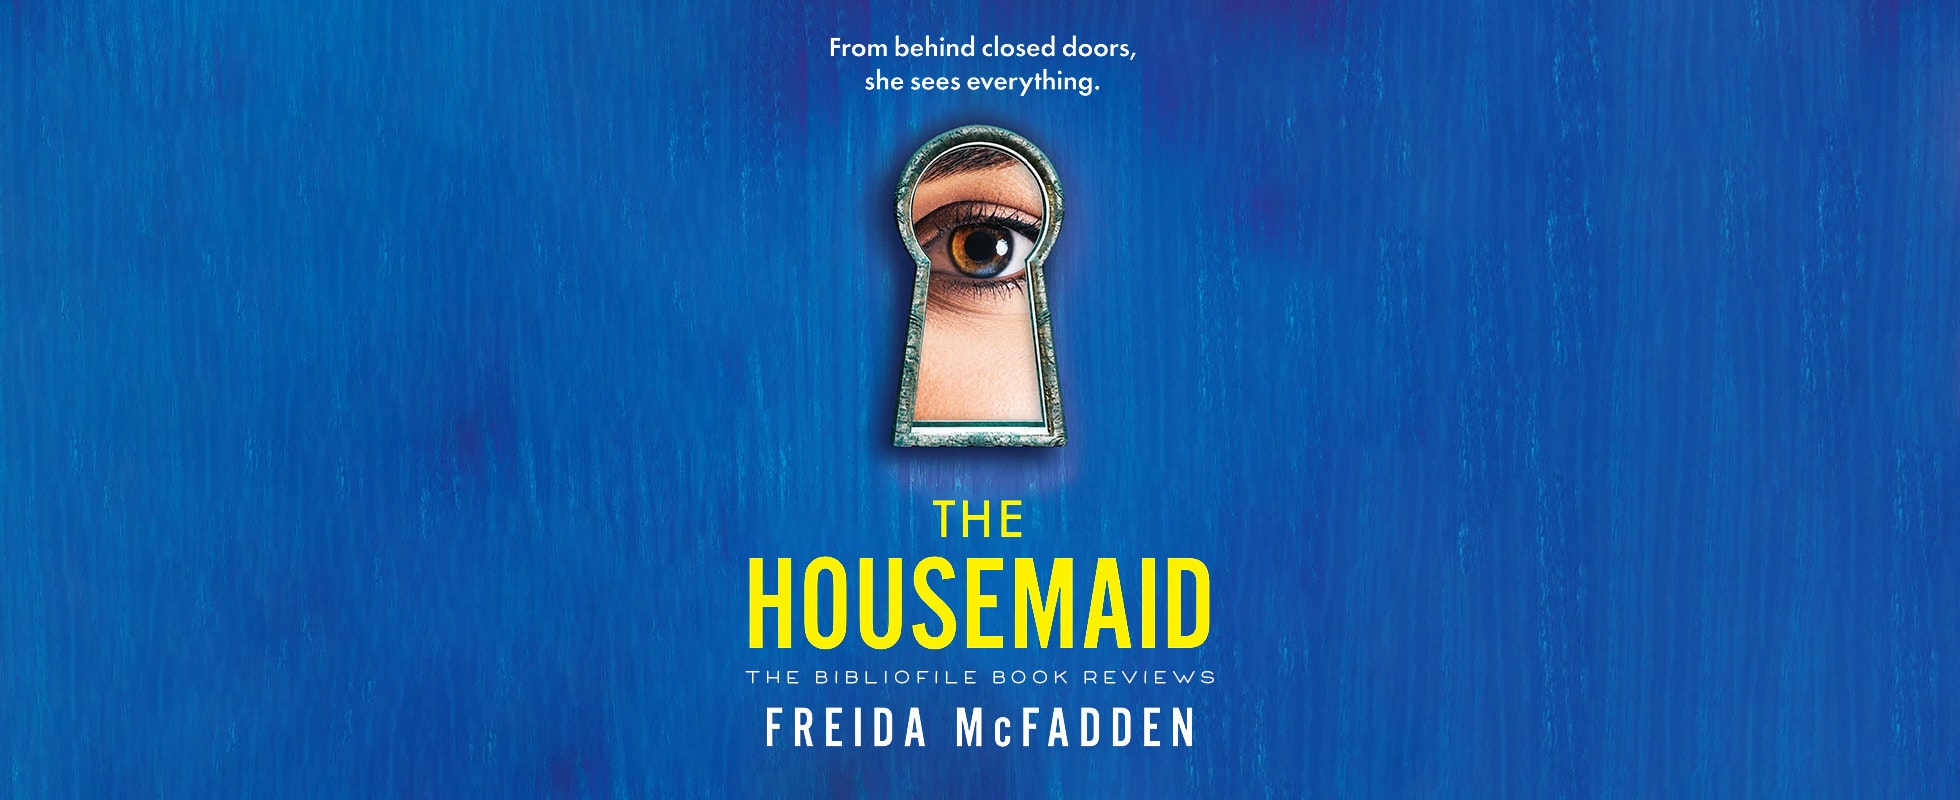 the housemaid freida mcfadden book review plot summary synopsis recap discussion spoilers